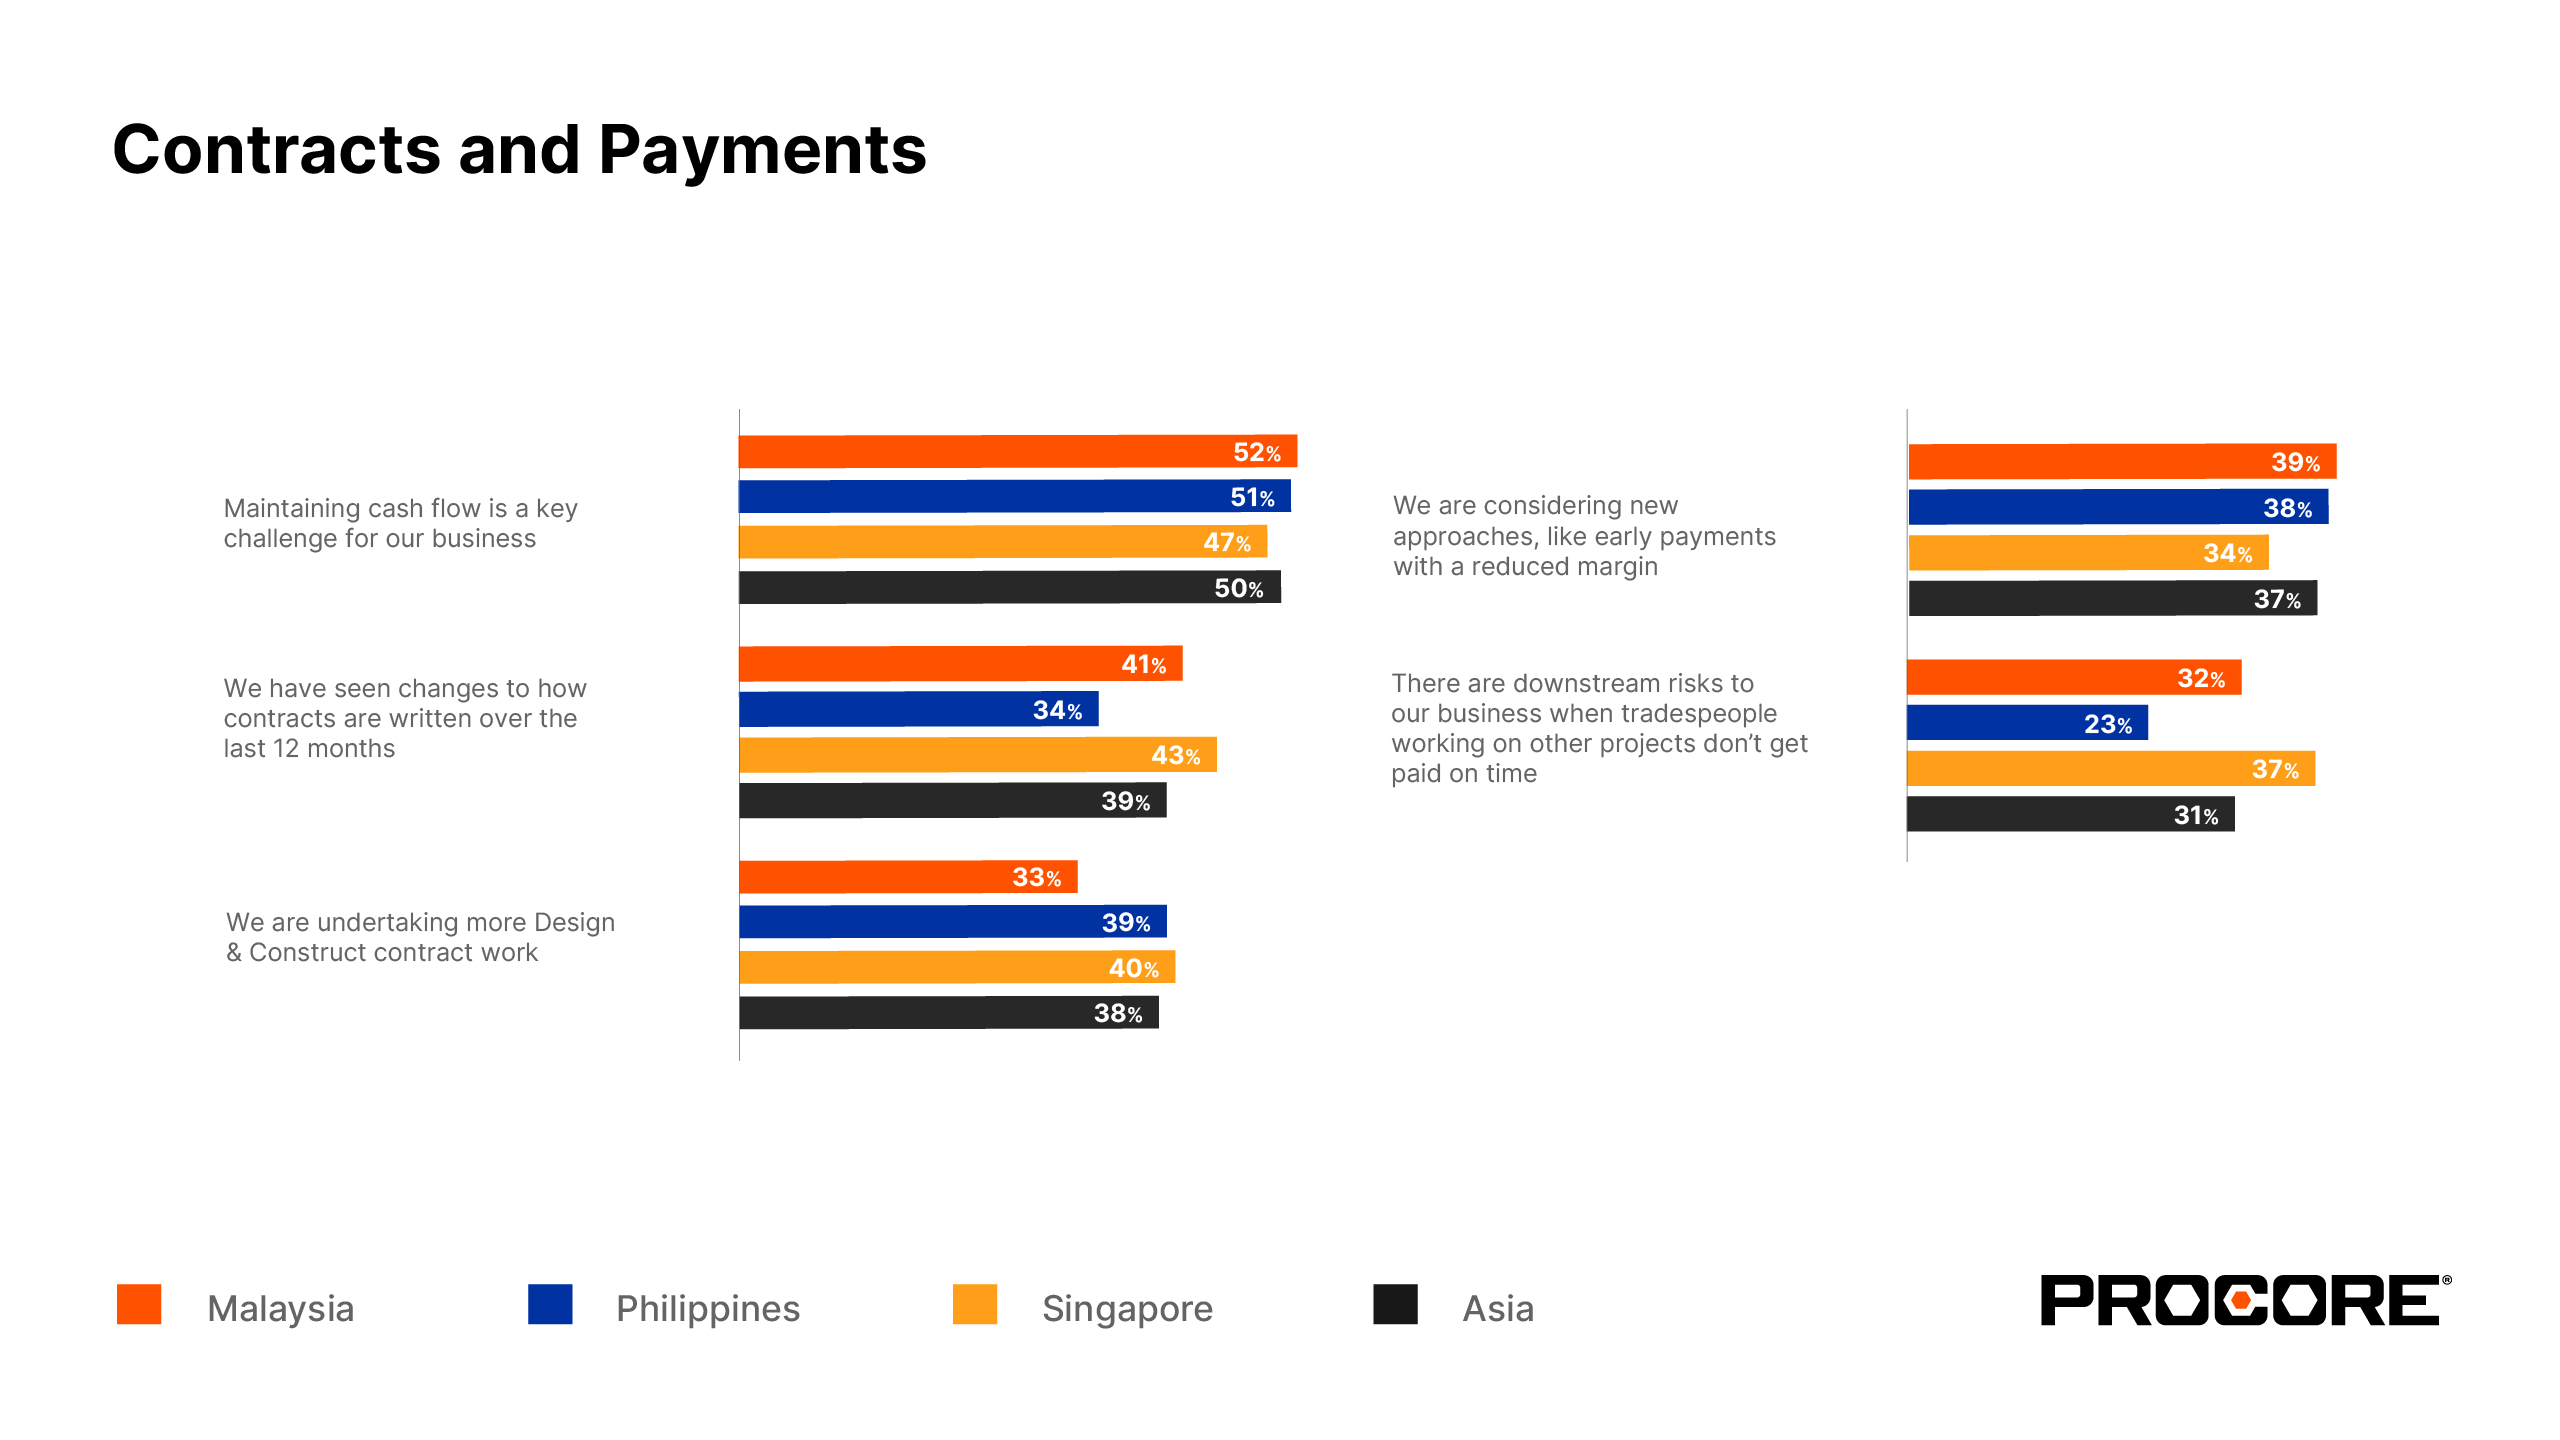 Contracts and payments charts